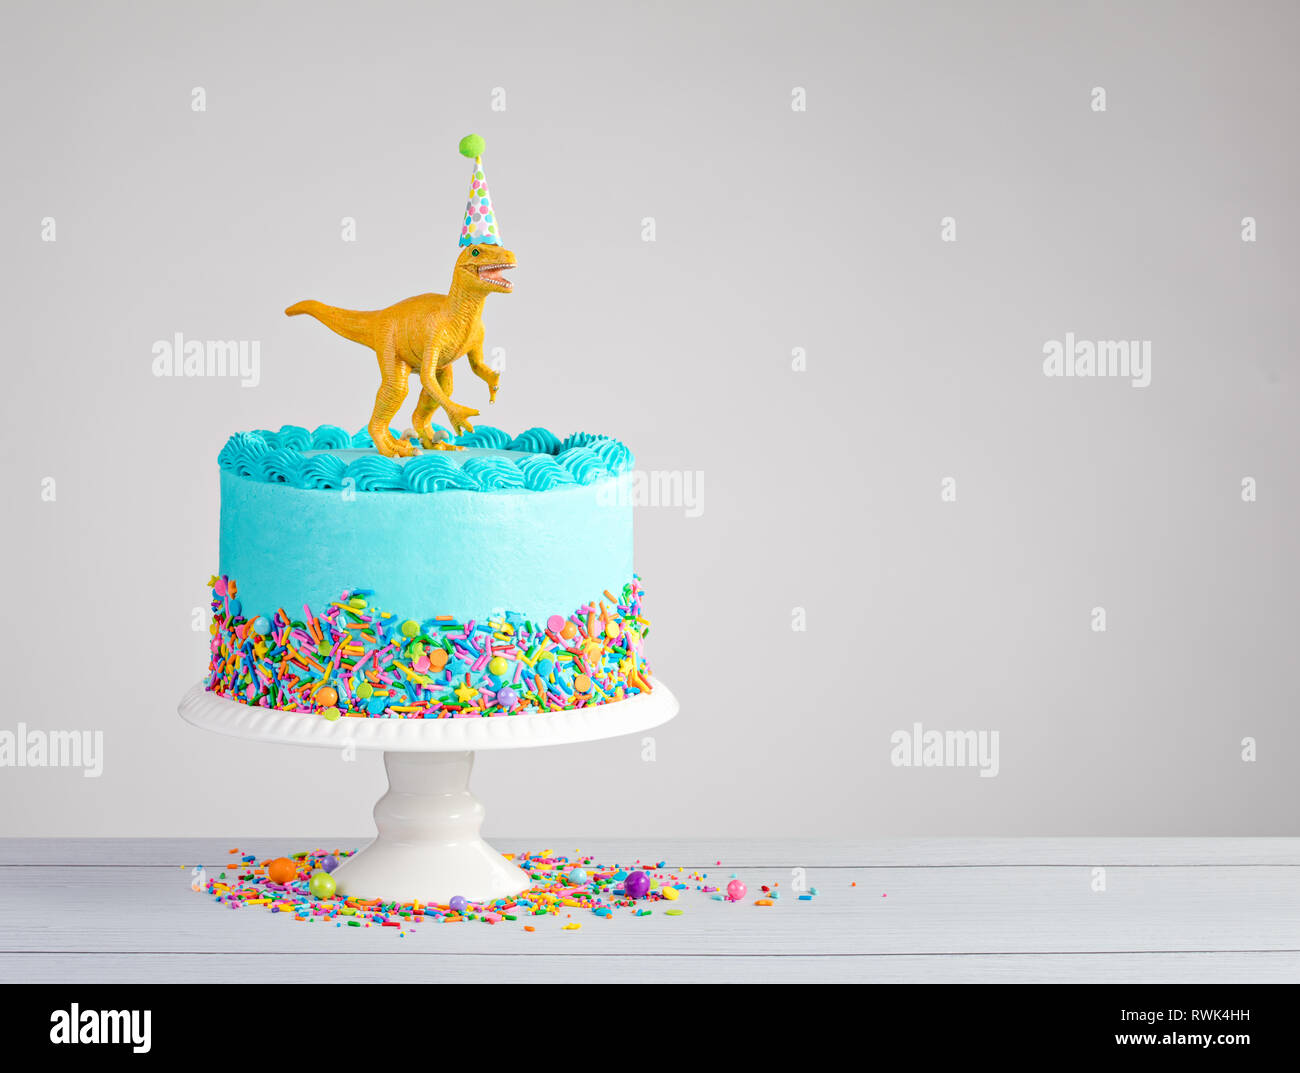 Blue buttercream birthday cake with colorful sprinkles and toy dinosaur  over a light grey background Stock Photo - Alamy